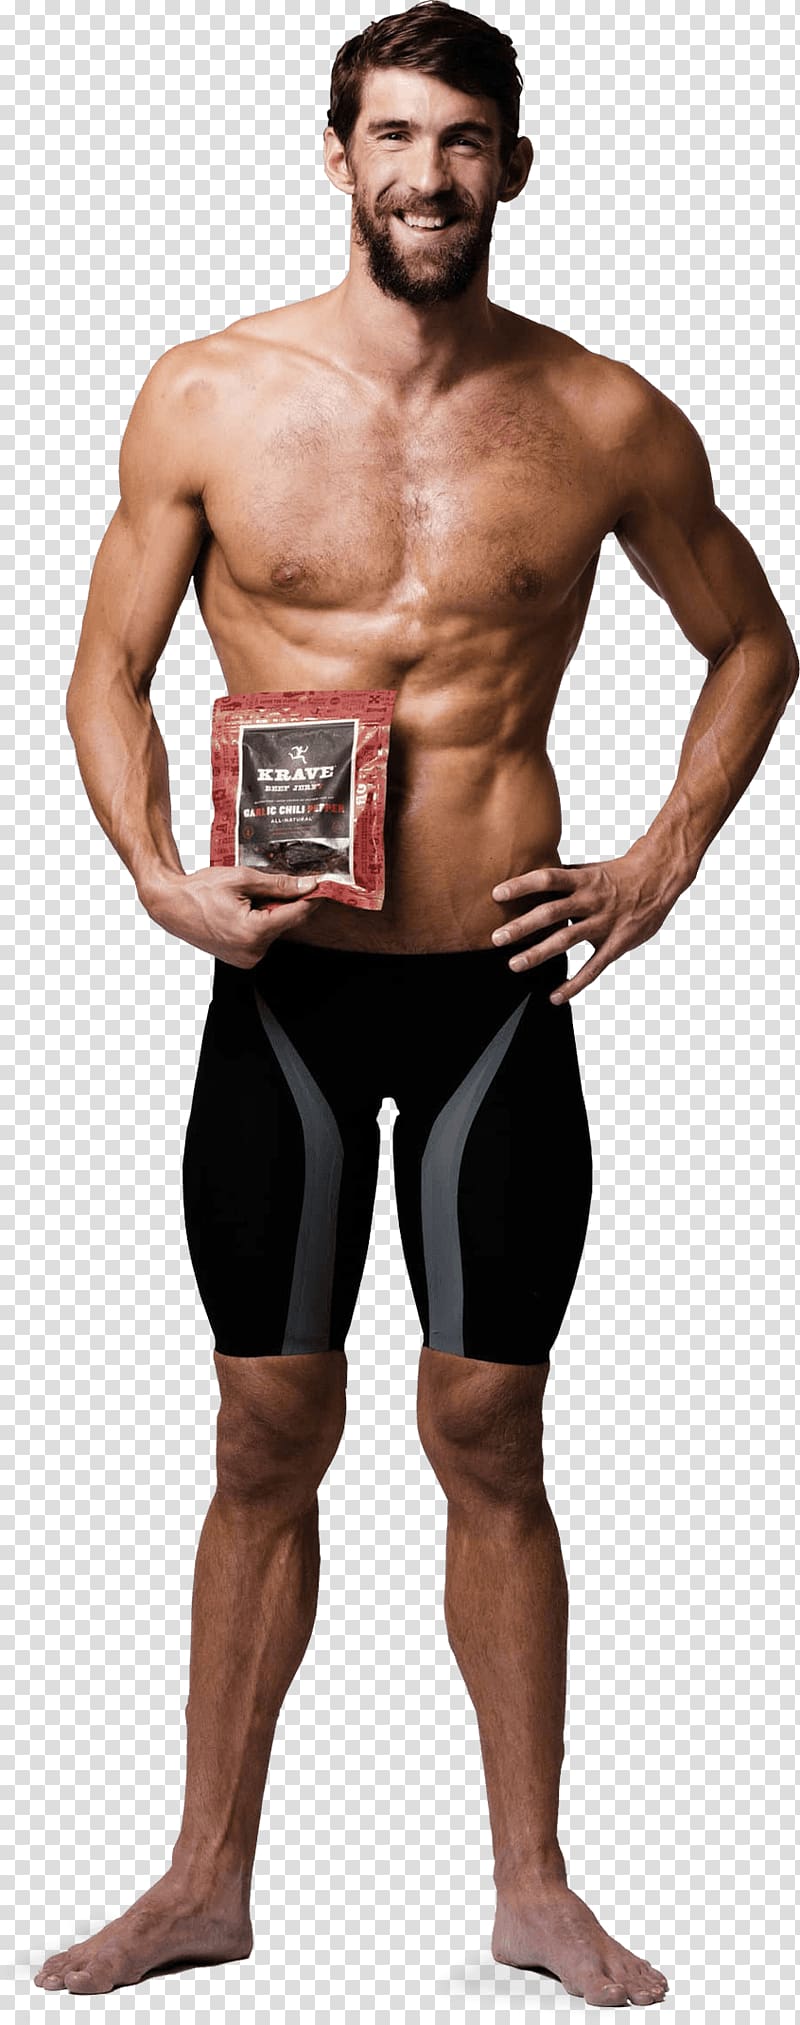 Michael Phelps Athlete Male Krave Jerky Physical fitness, Mike transparent background PNG clipart